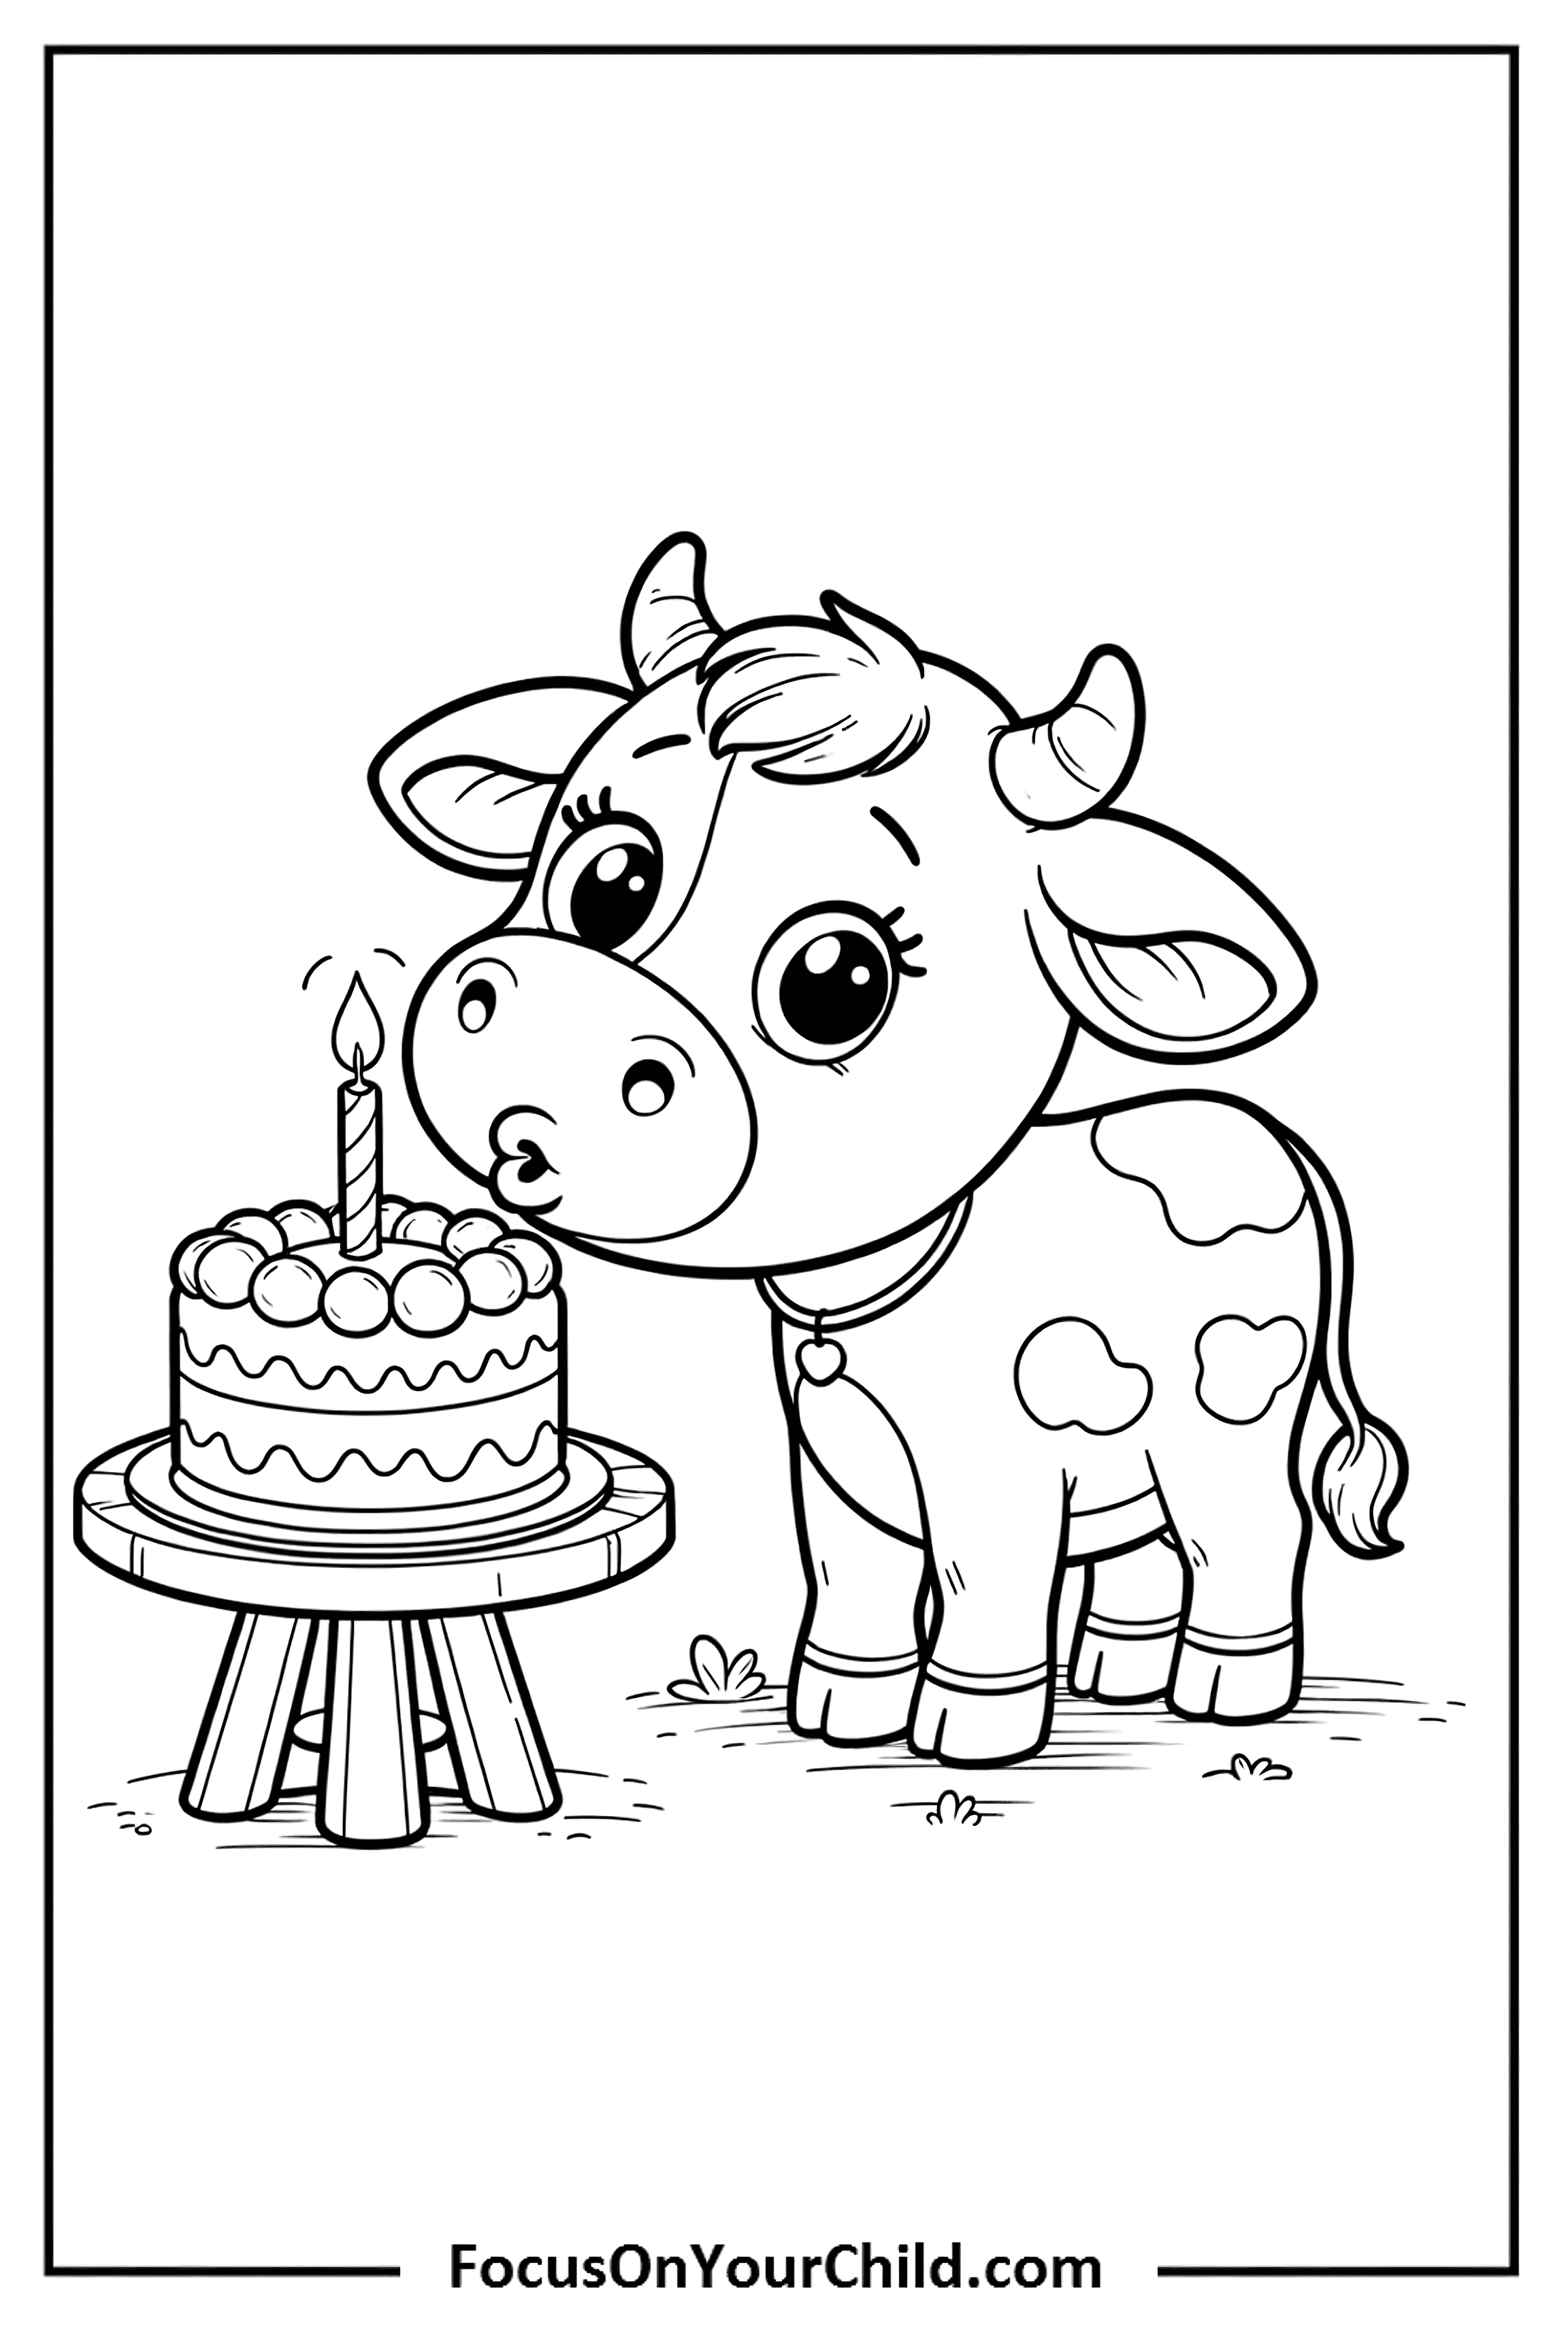 Adorable cow blowing birthday candle on cake in charming cartoon scene.